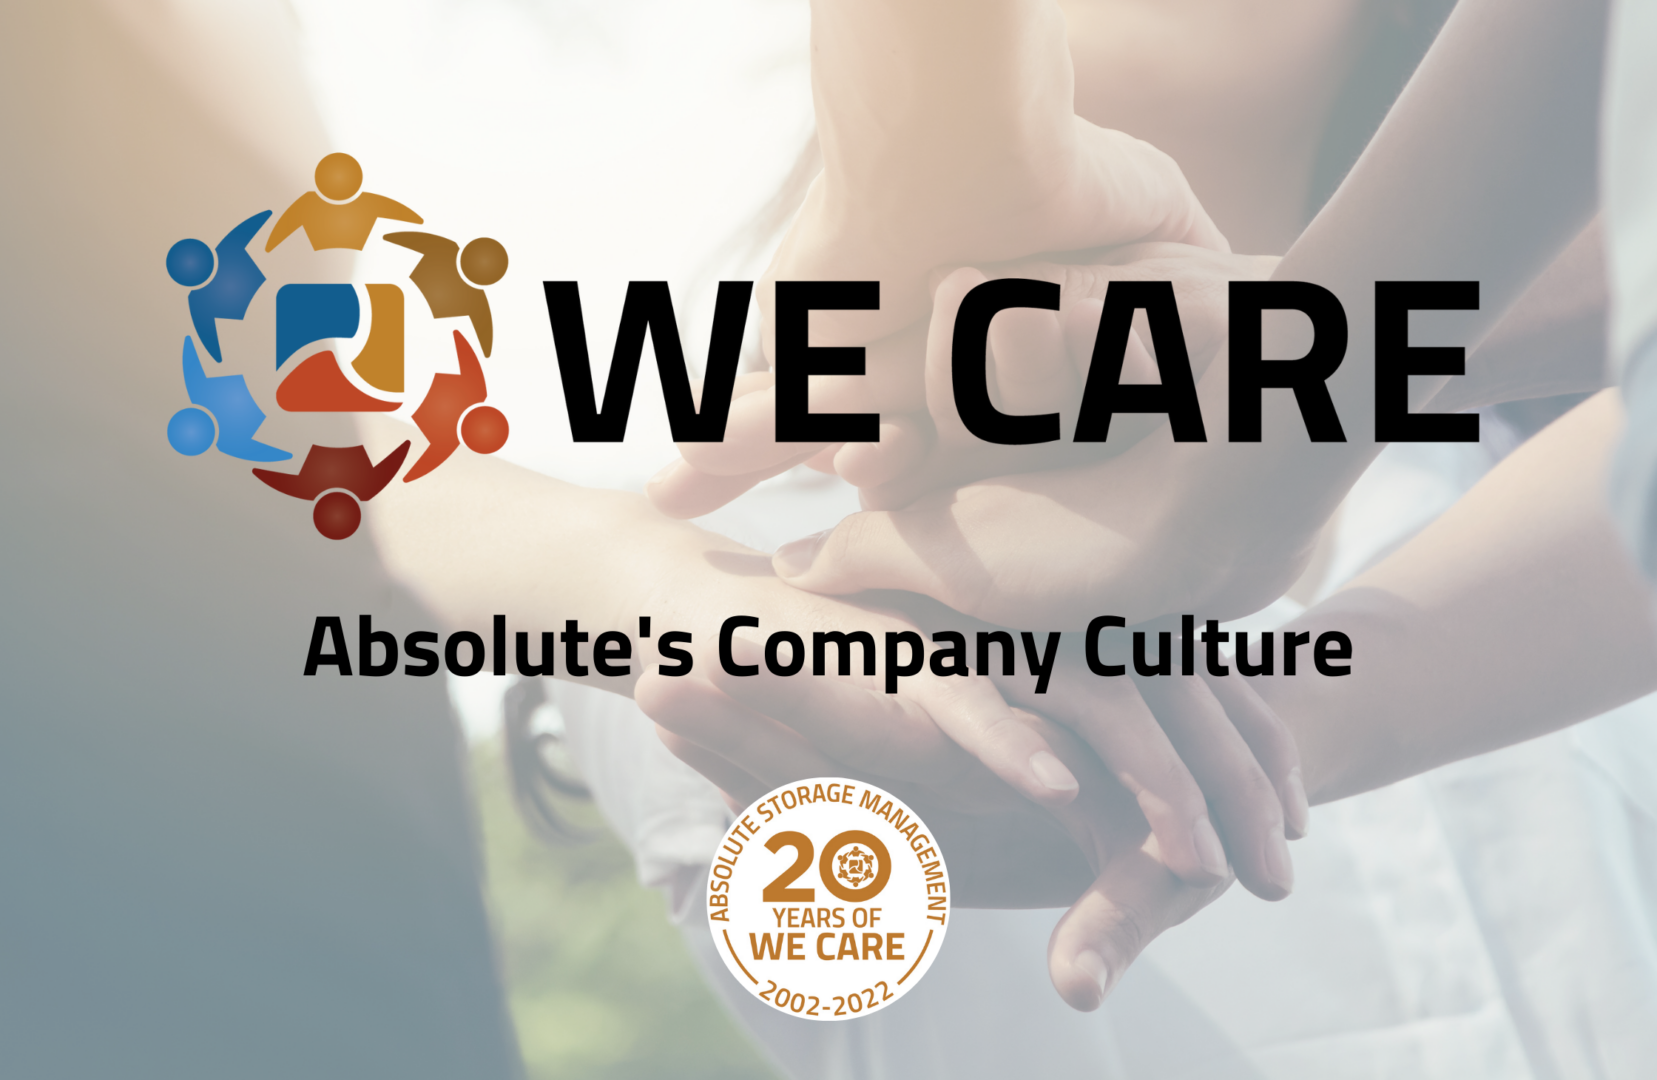 We Care: Absolute's Company Culture